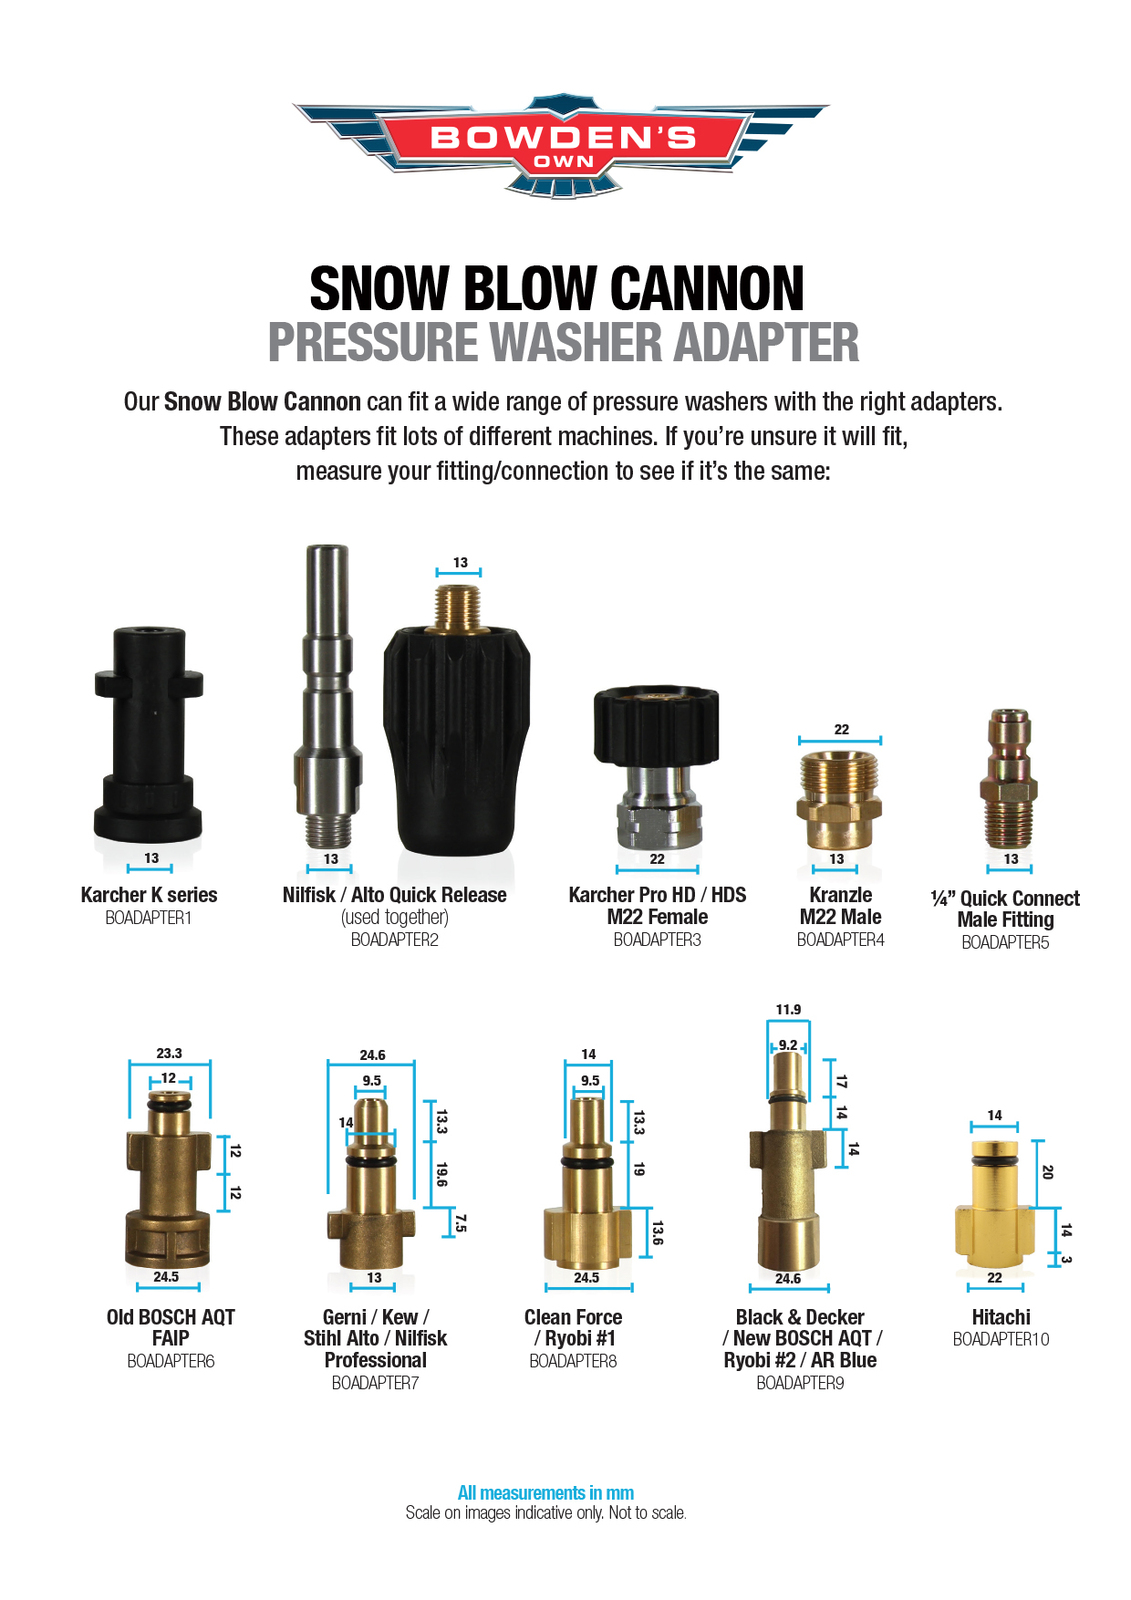 Snow Blow Cannon Adapters